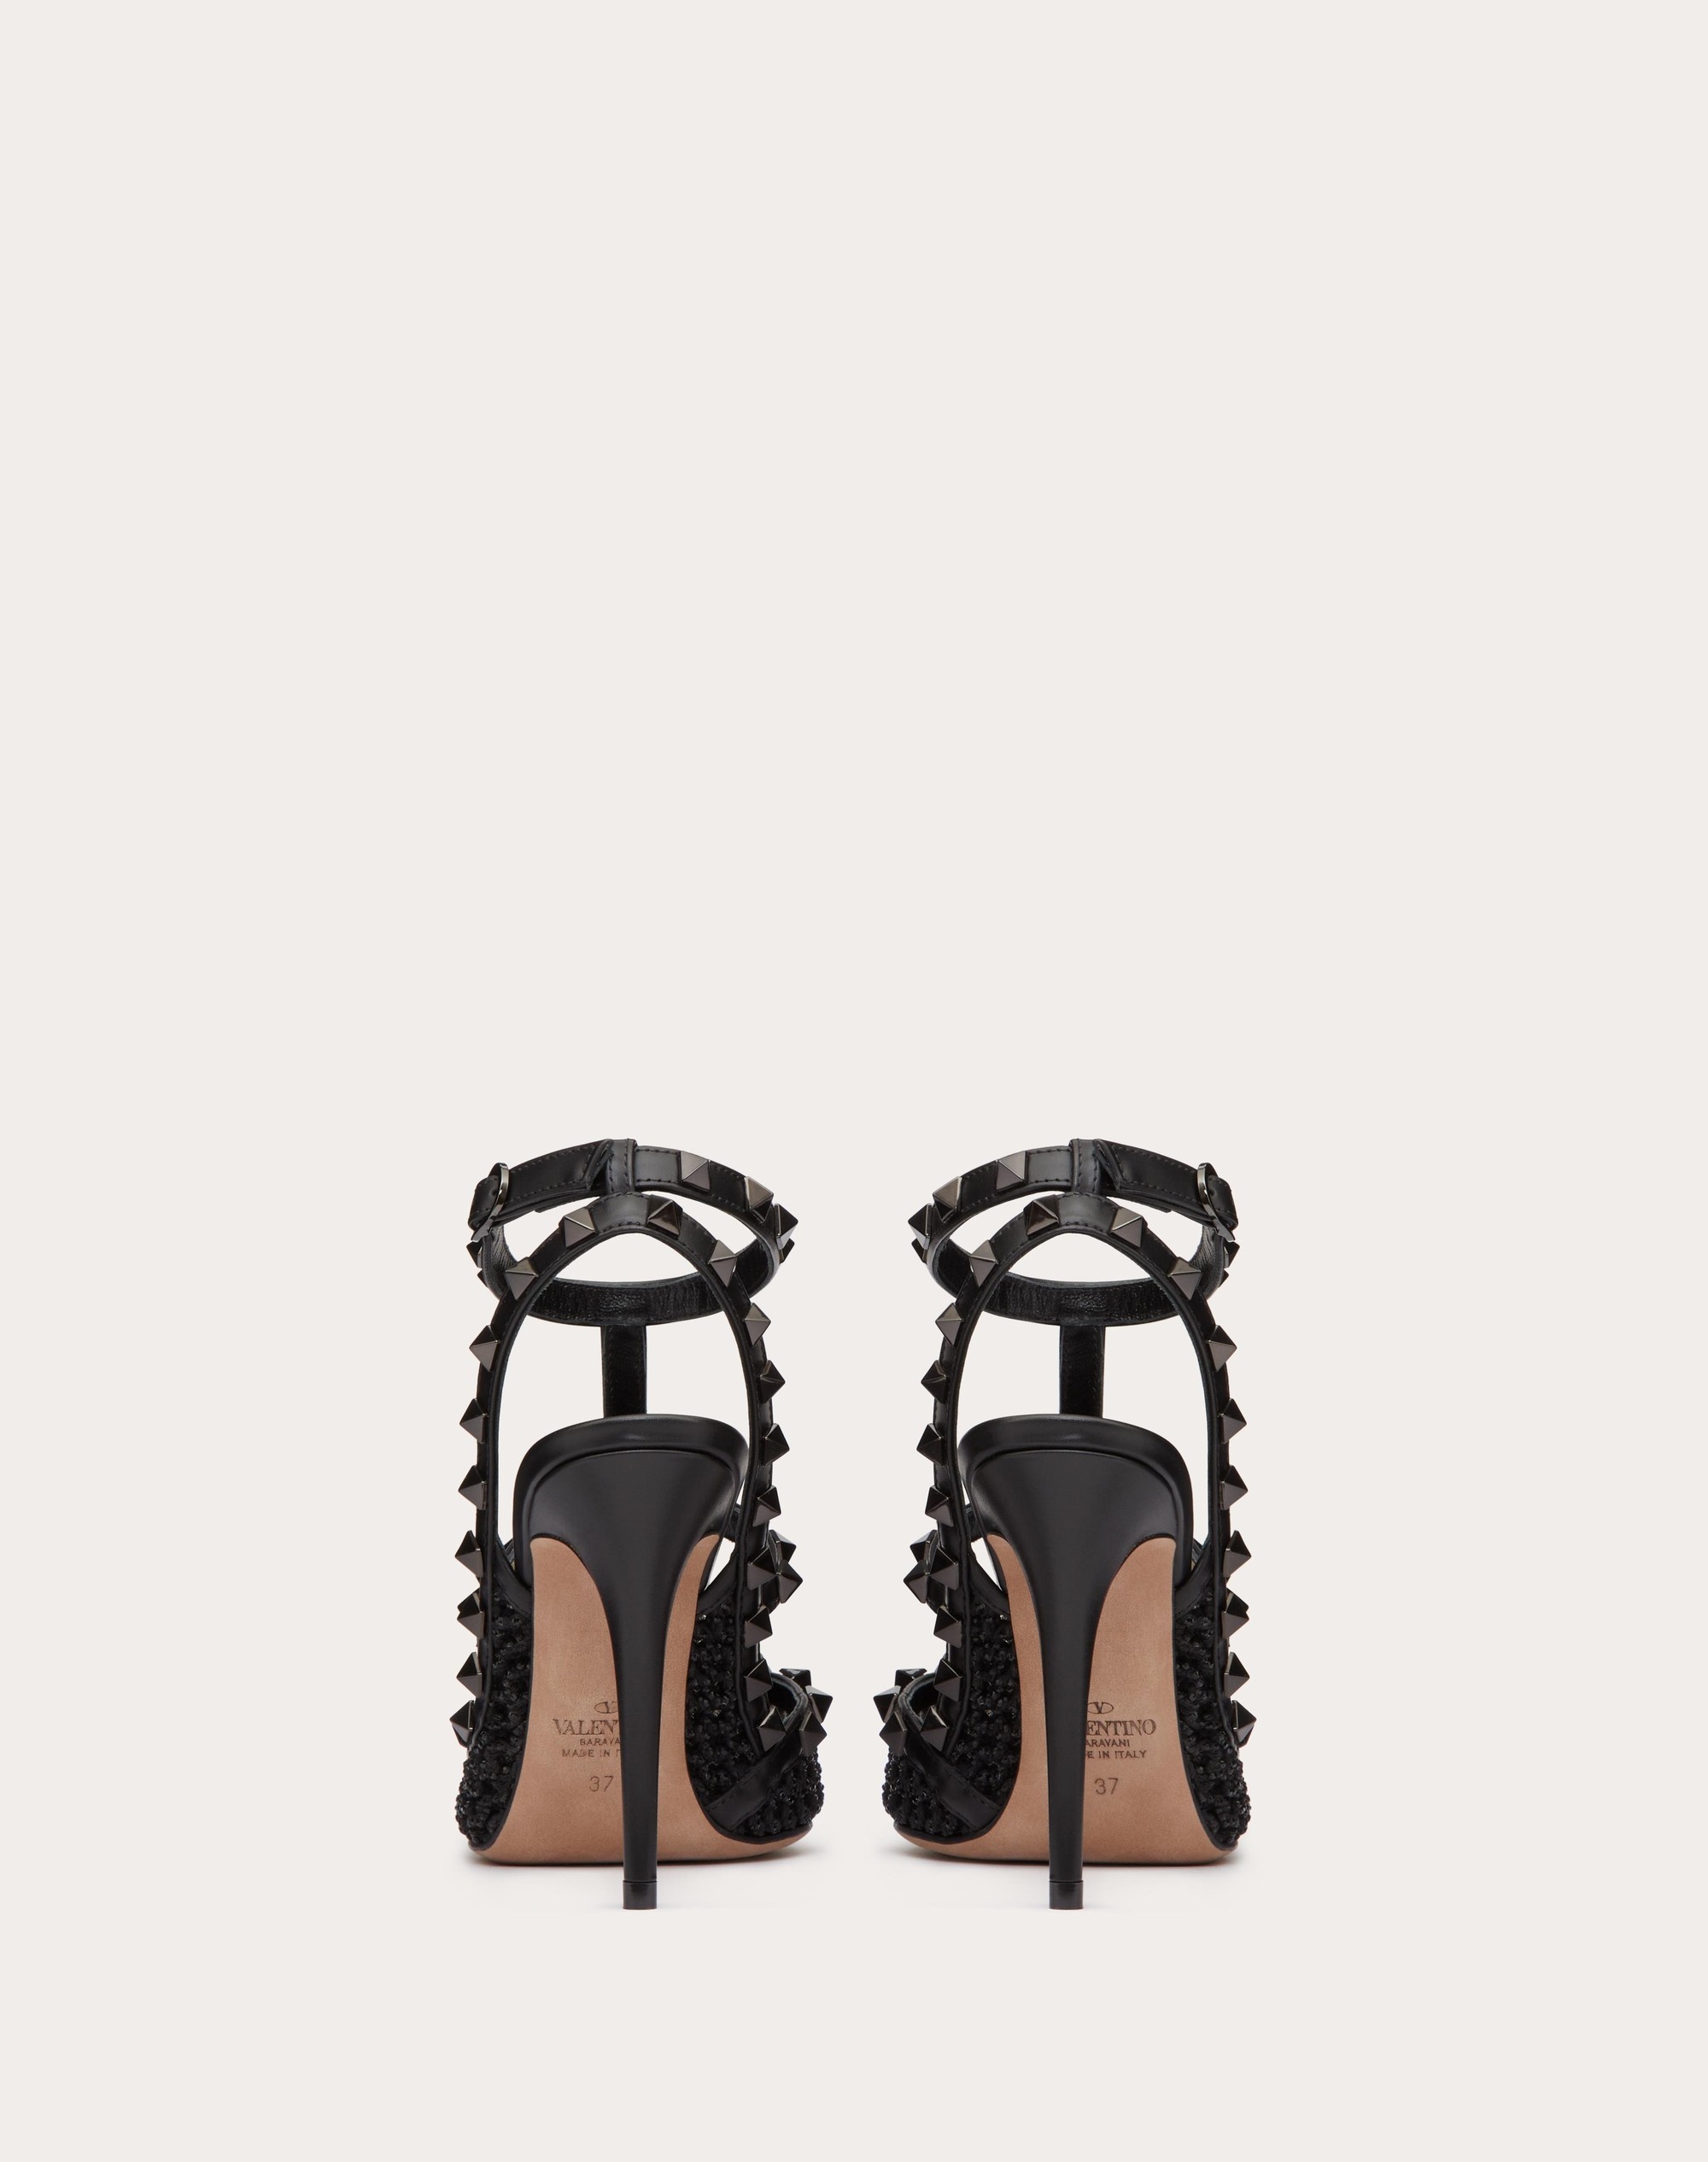 ROCKSTUD MESH PUMP WITH CRYSTALS AND STRAPS 100MM - 3